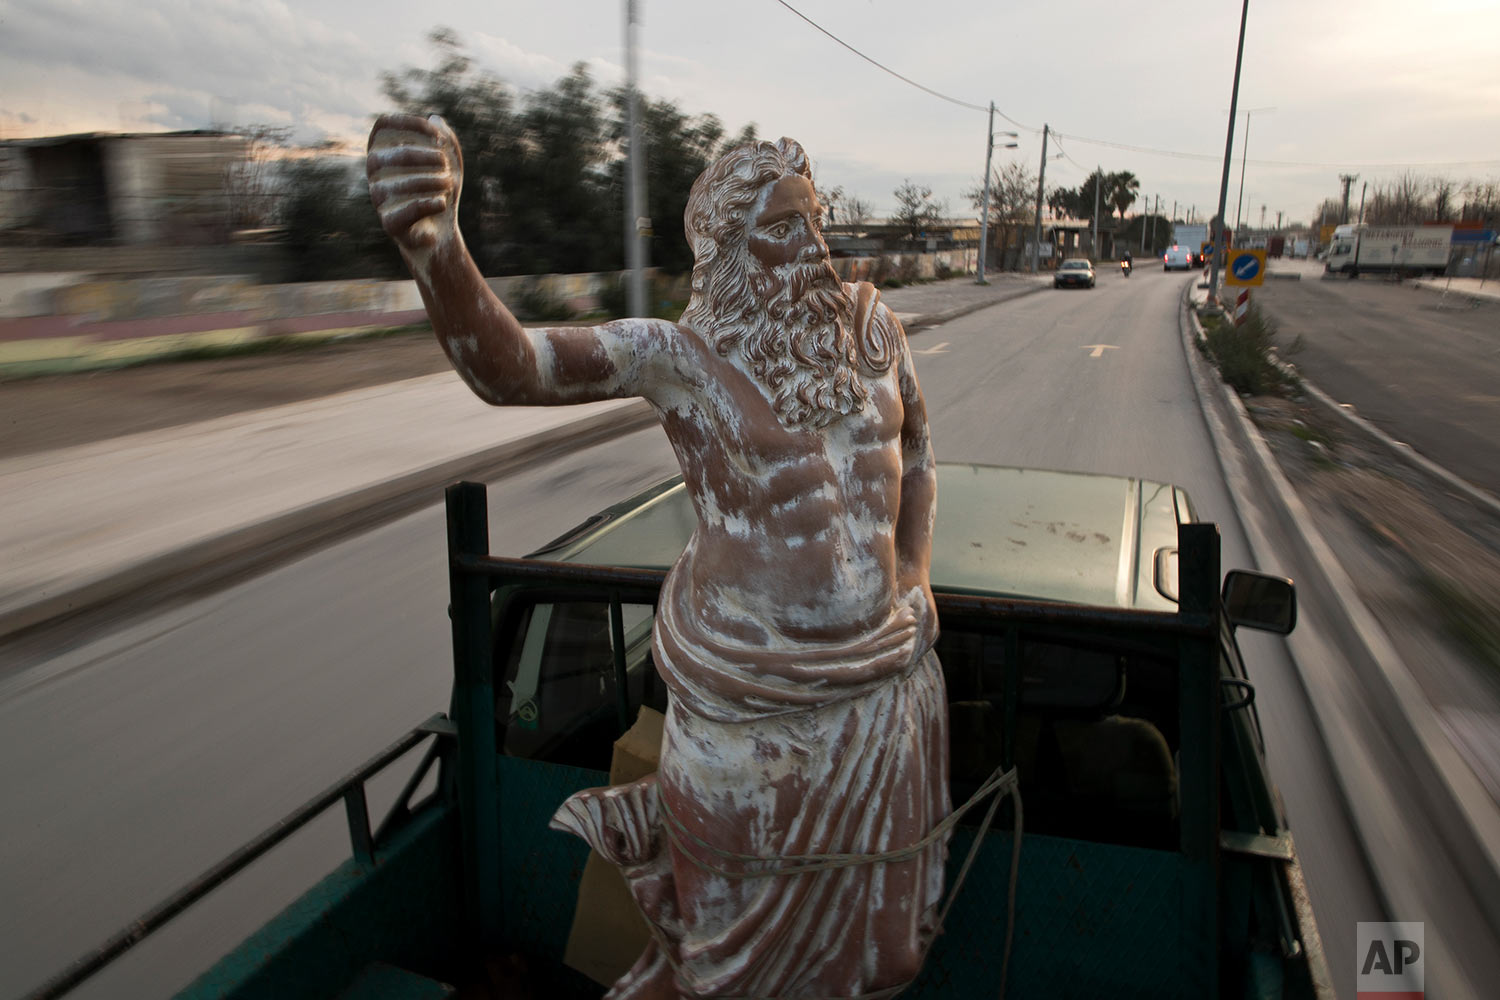  In this Tuesday, Dec 19, 2017 photo, a pickup track drives on a street of Athens carrying a terracotta statue of Zeus, chief among the ancient Greek gods, made by sculptor and ceramicist Haralambos Goumas. (AP Photo/Petros Giannakouris) 